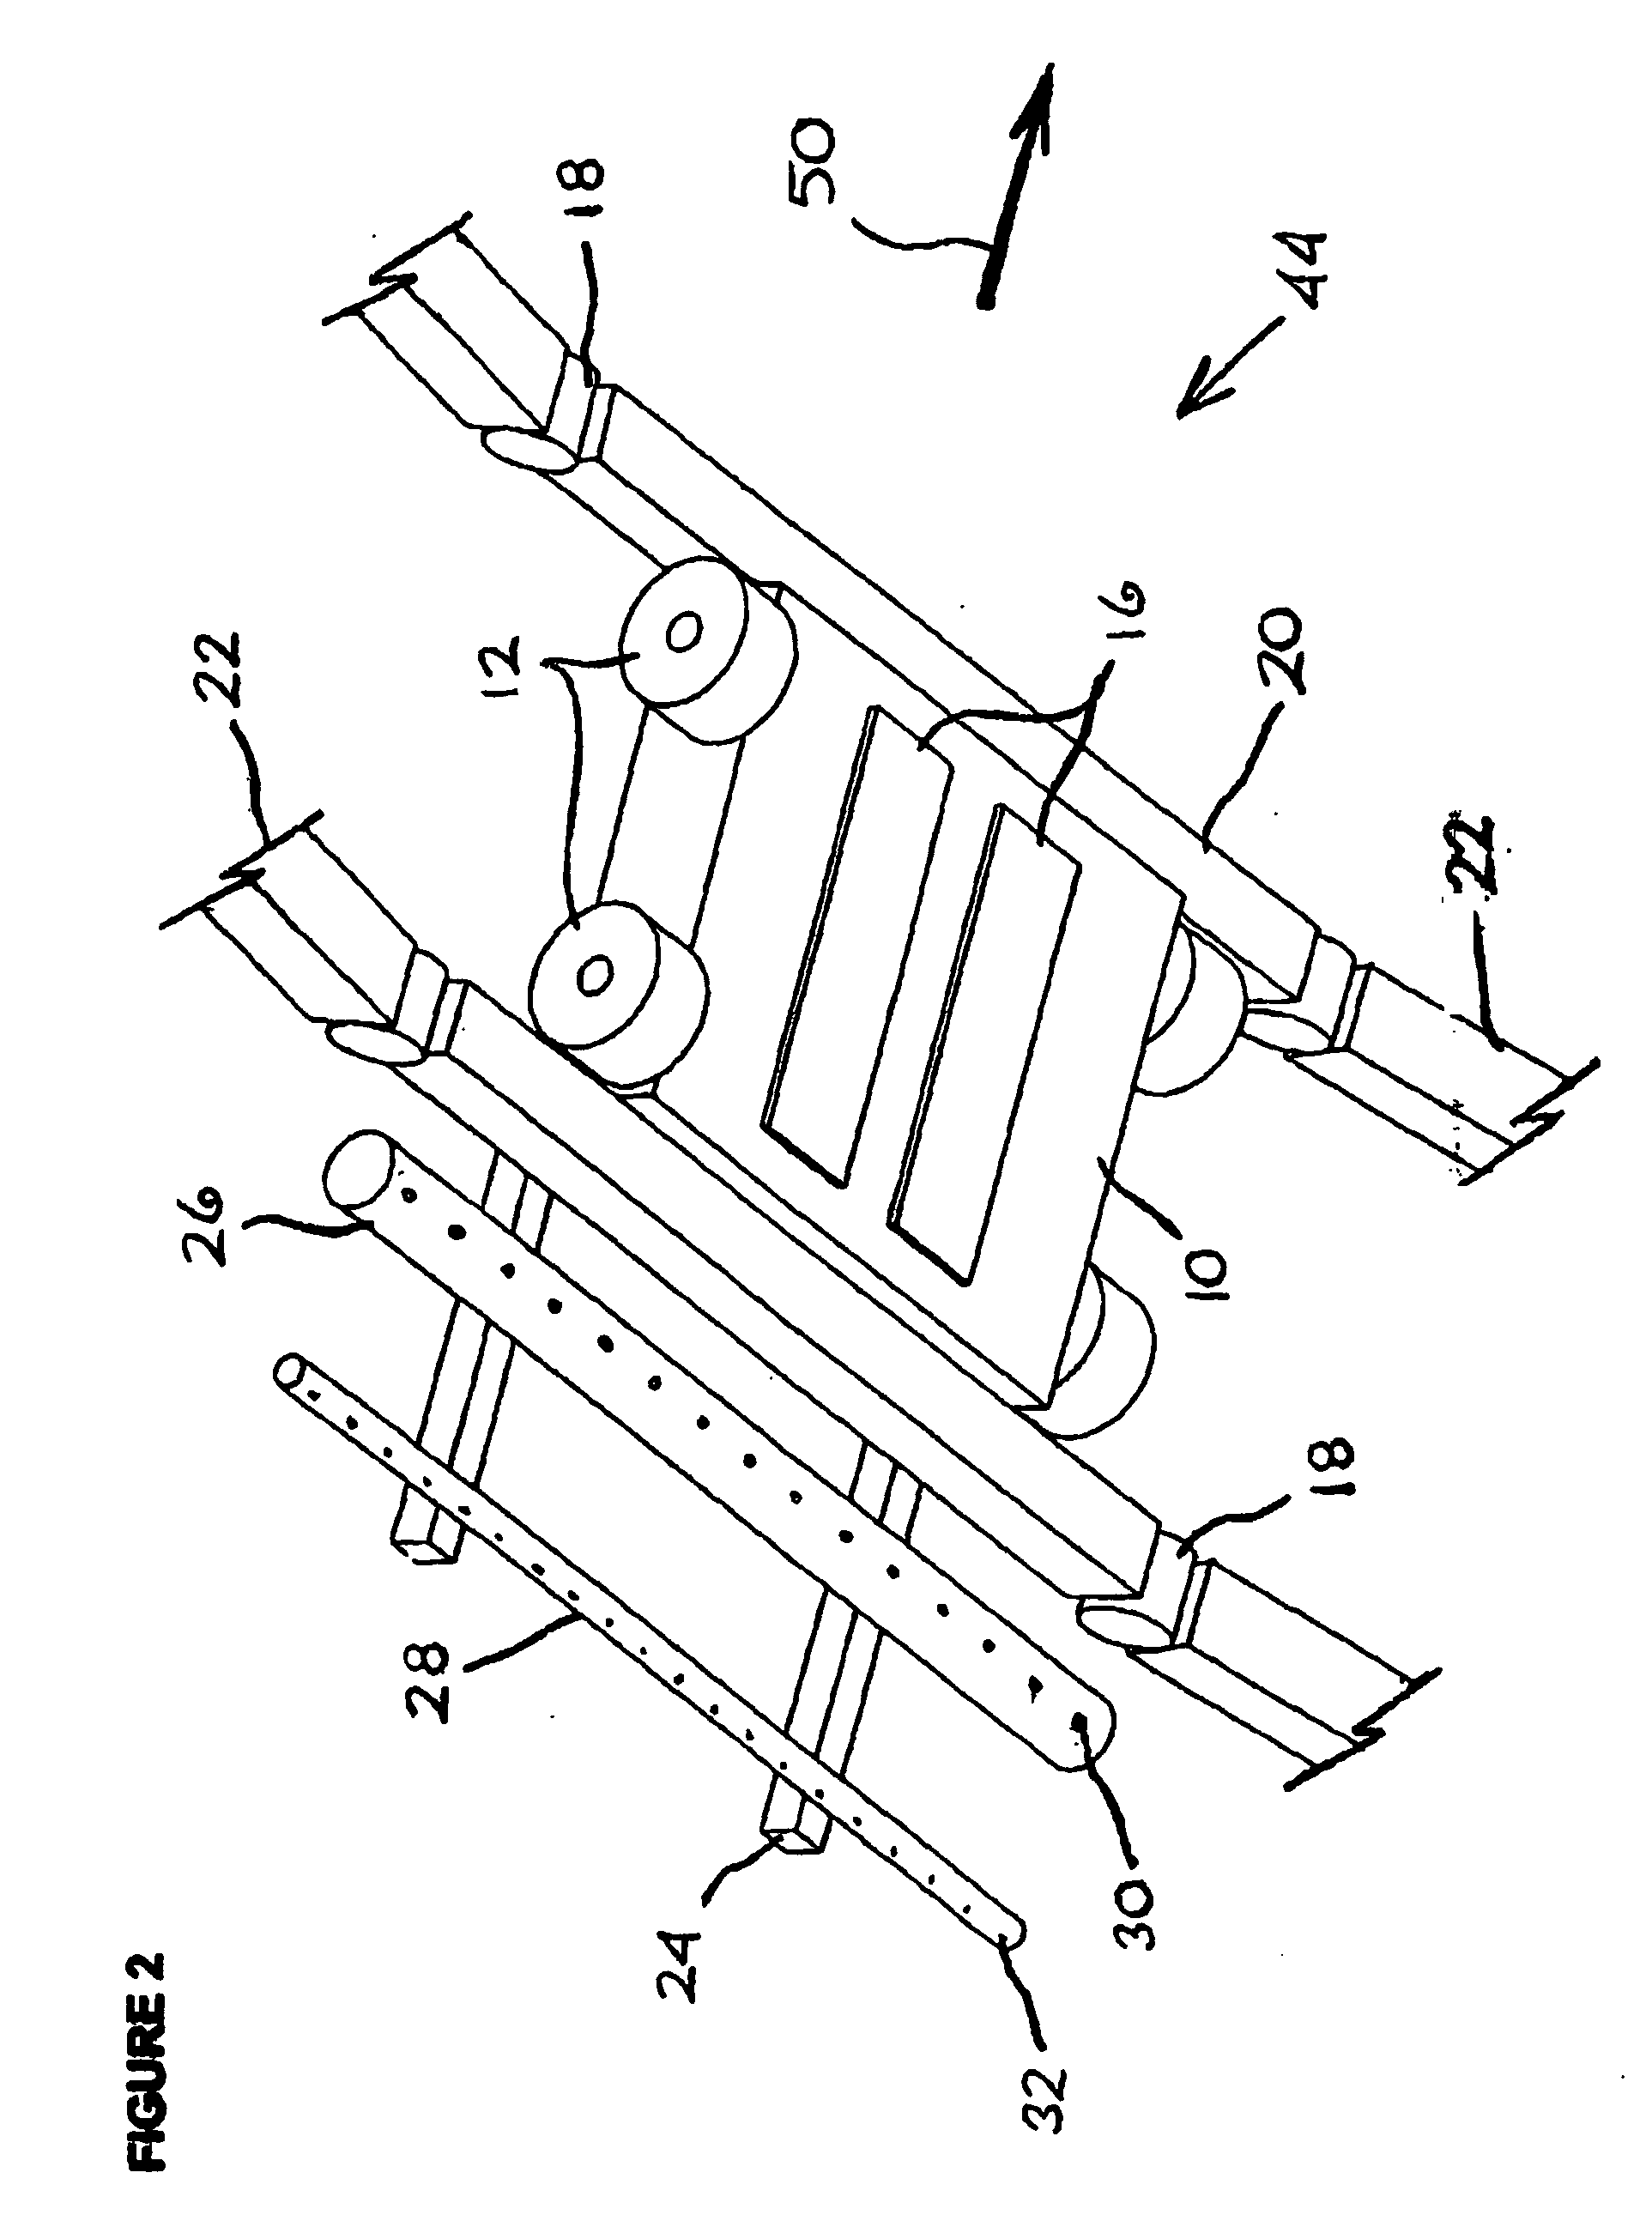 Skinned structures of air hardenable or liquid quench hardenable steel plate and methods of constructing thereof